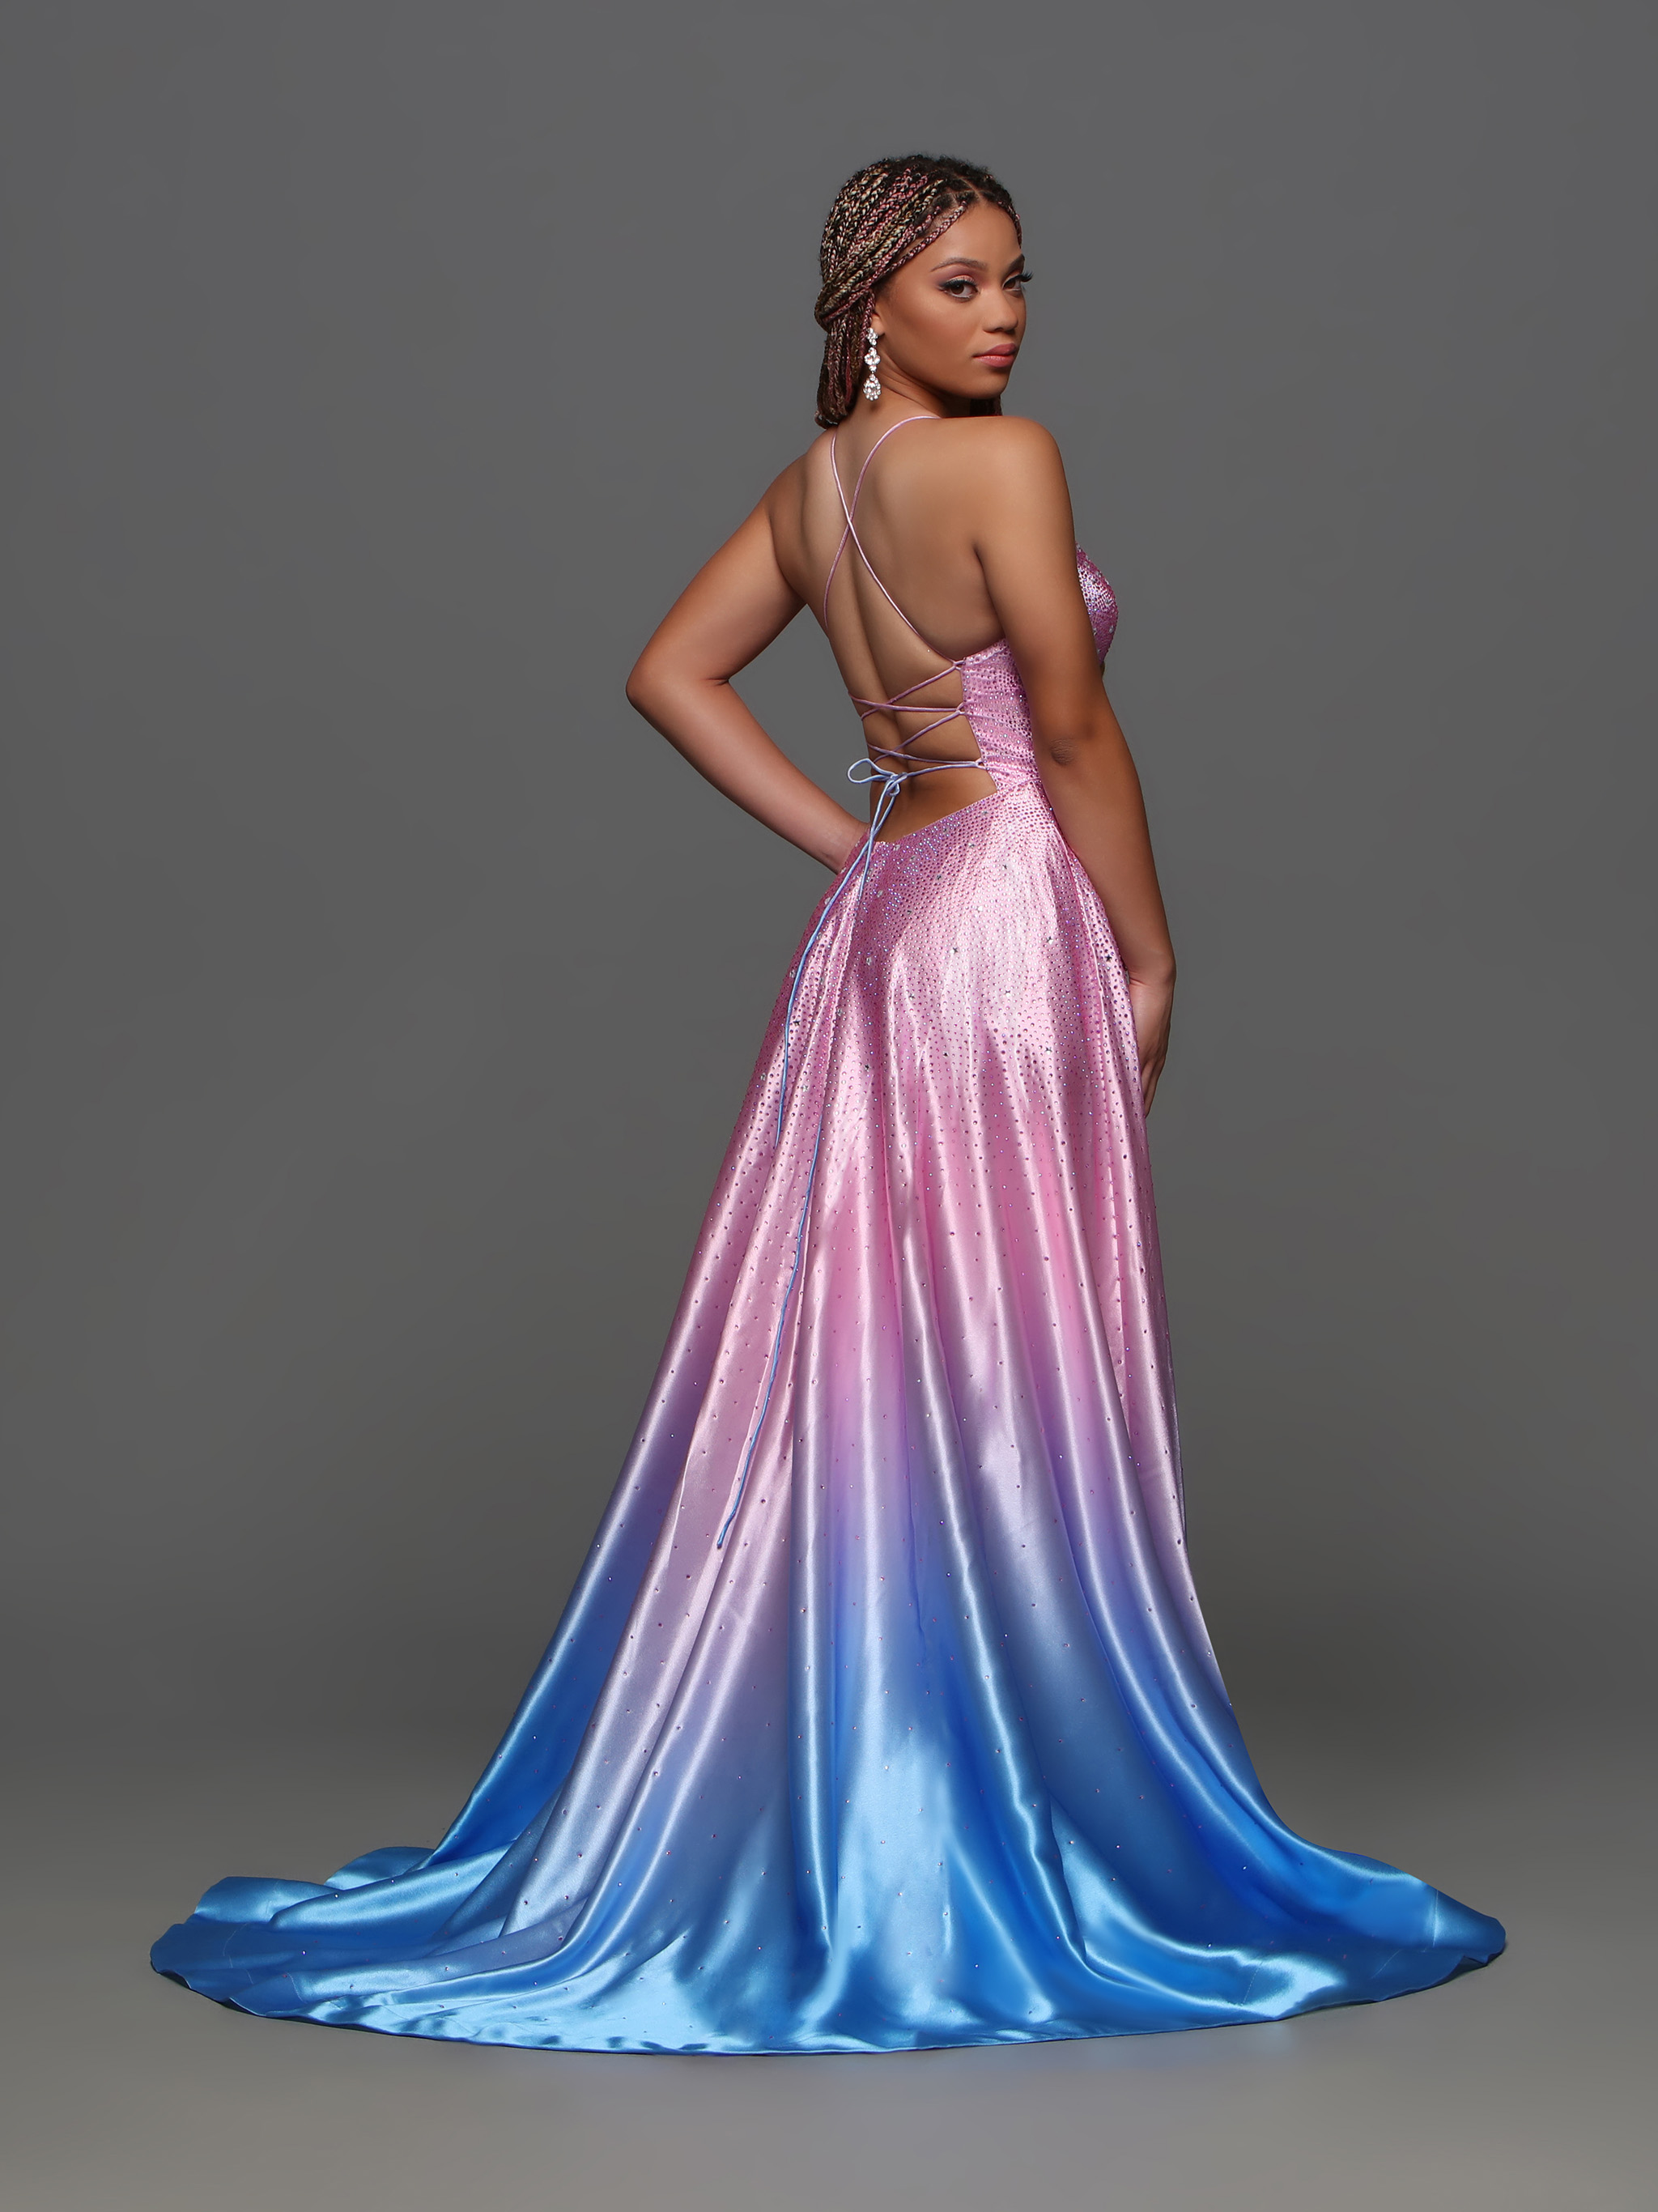 Image showing back view of style #72386